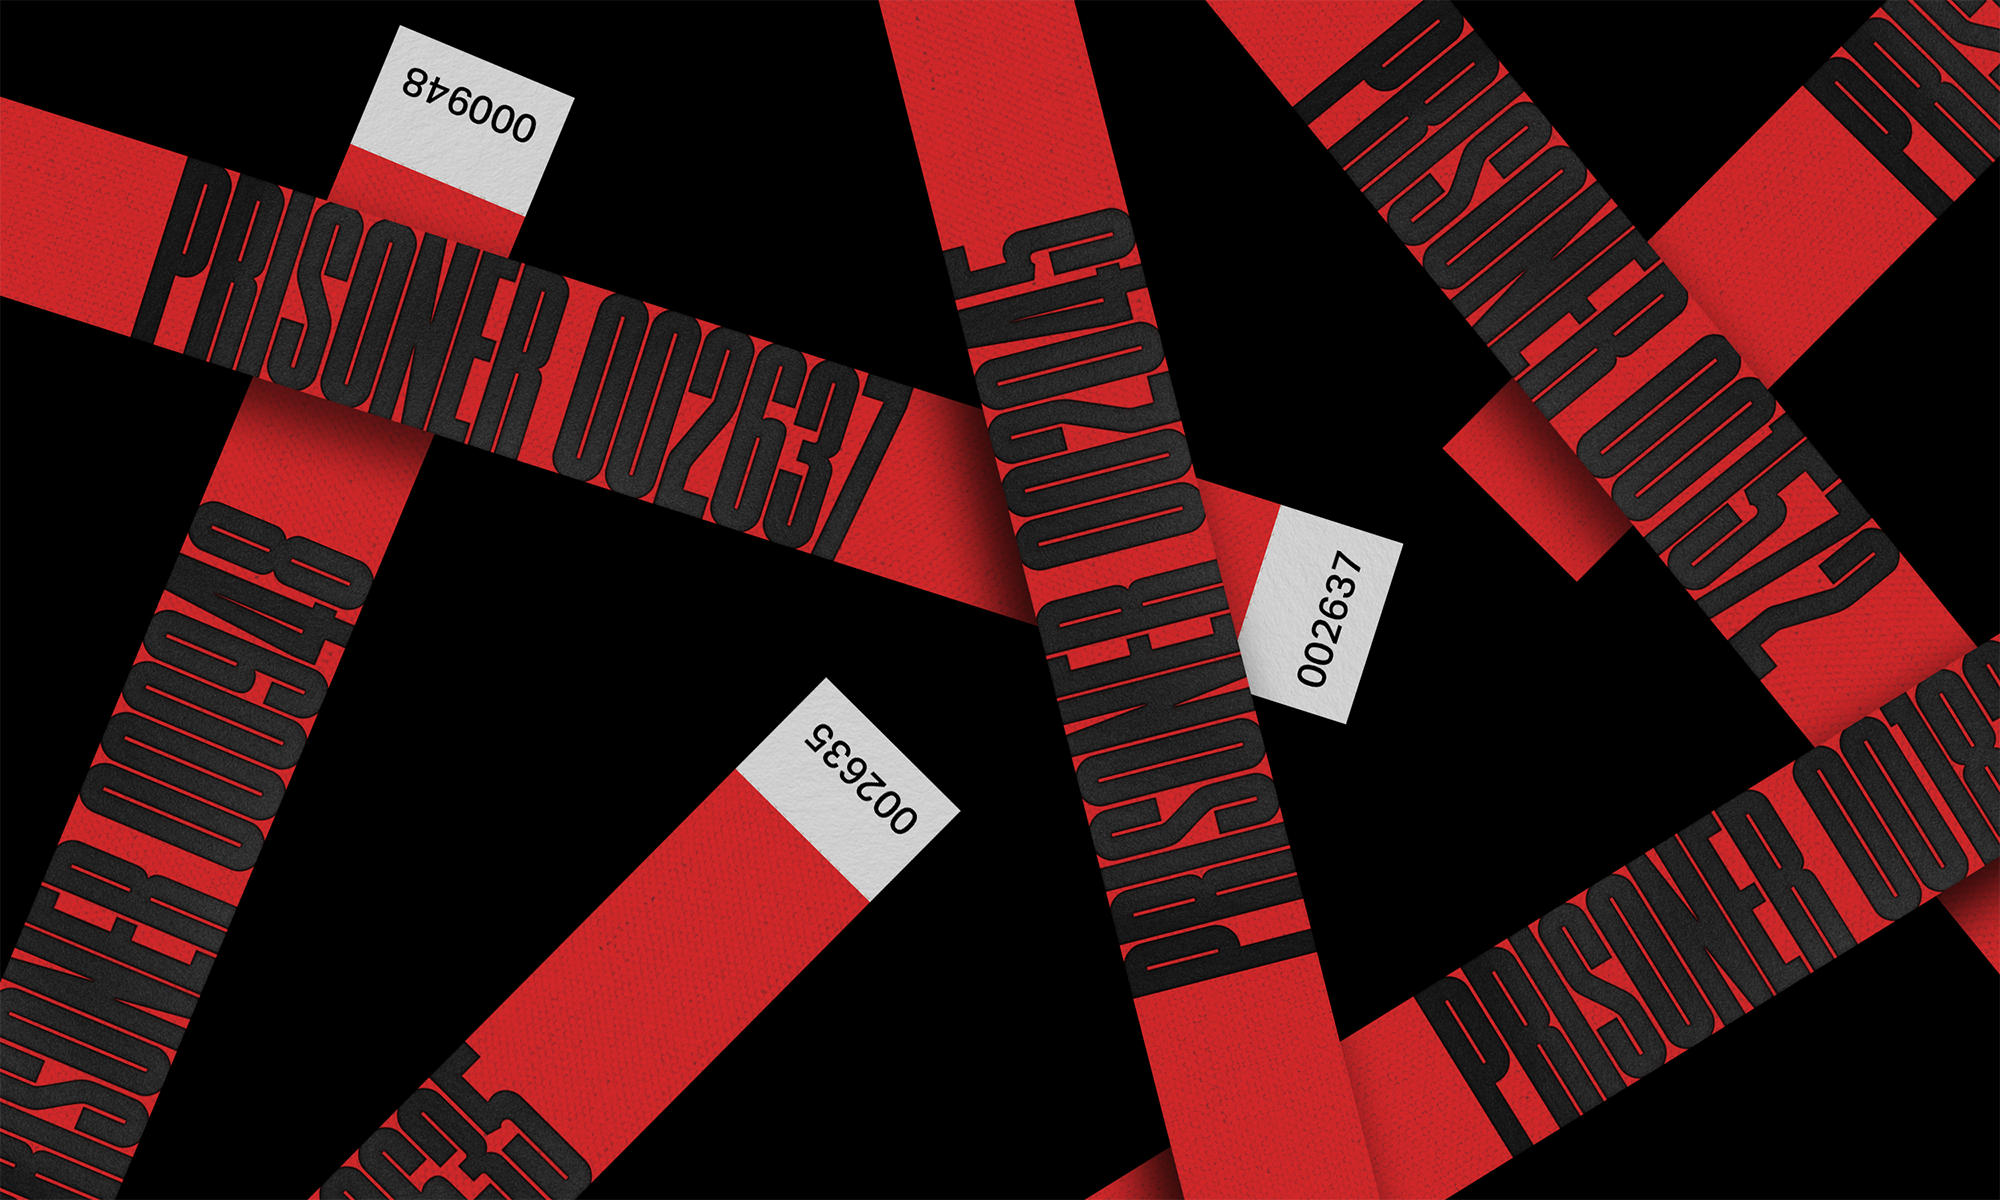 BA Graphic Communication work by Lara Mortimer showing entry wristbands for the Clink Prison Museum.